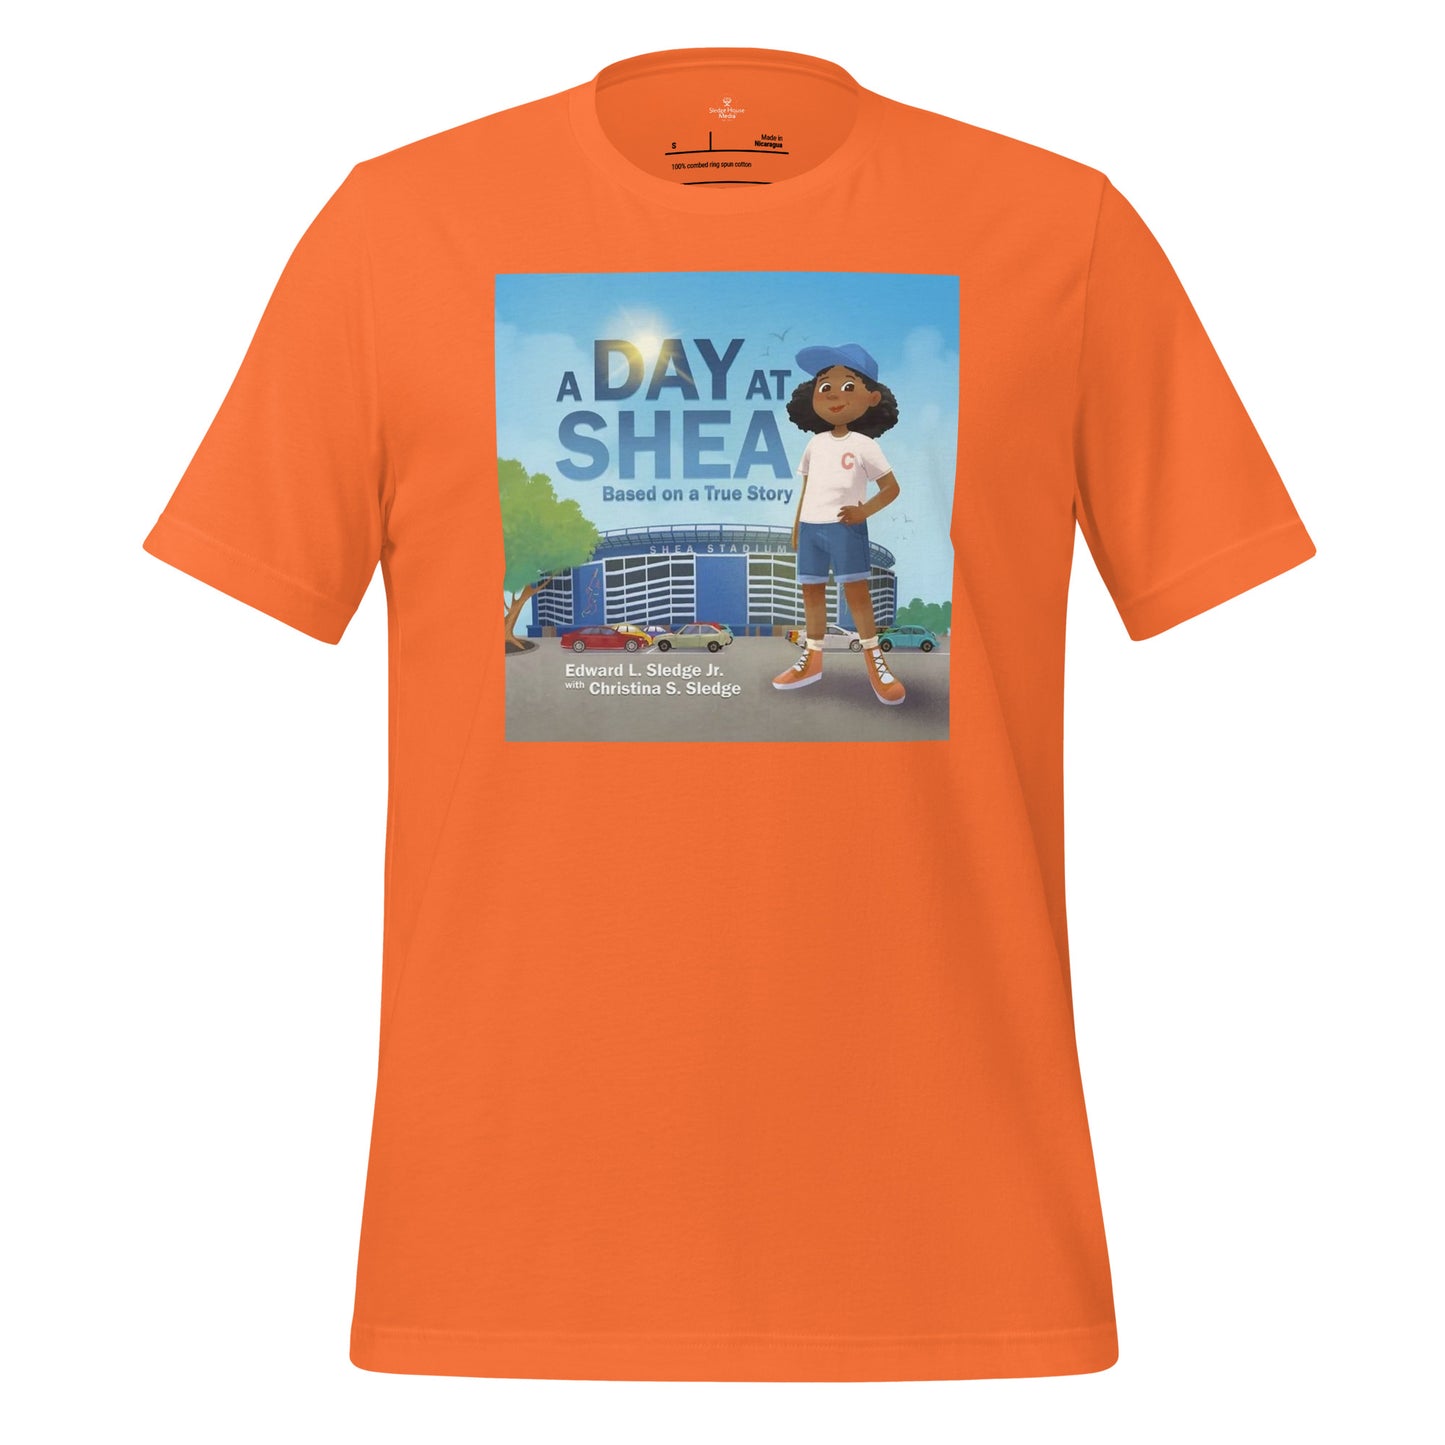 A Day at Shea Adult Unisex Graphic T-Shirt